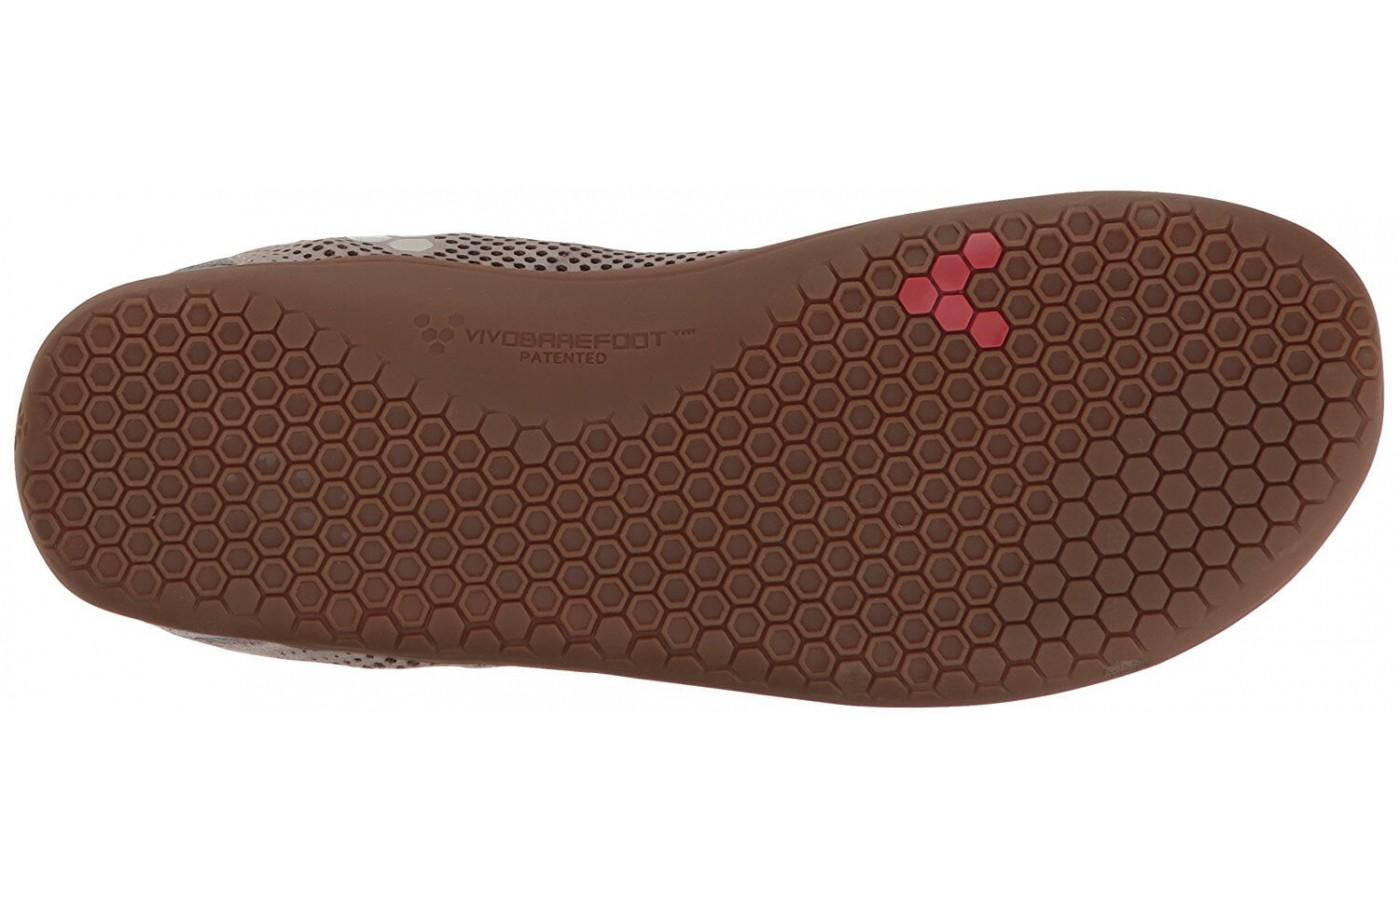 The bottom of the Vivobarefoot Primus Trio is soft to allow natural movement